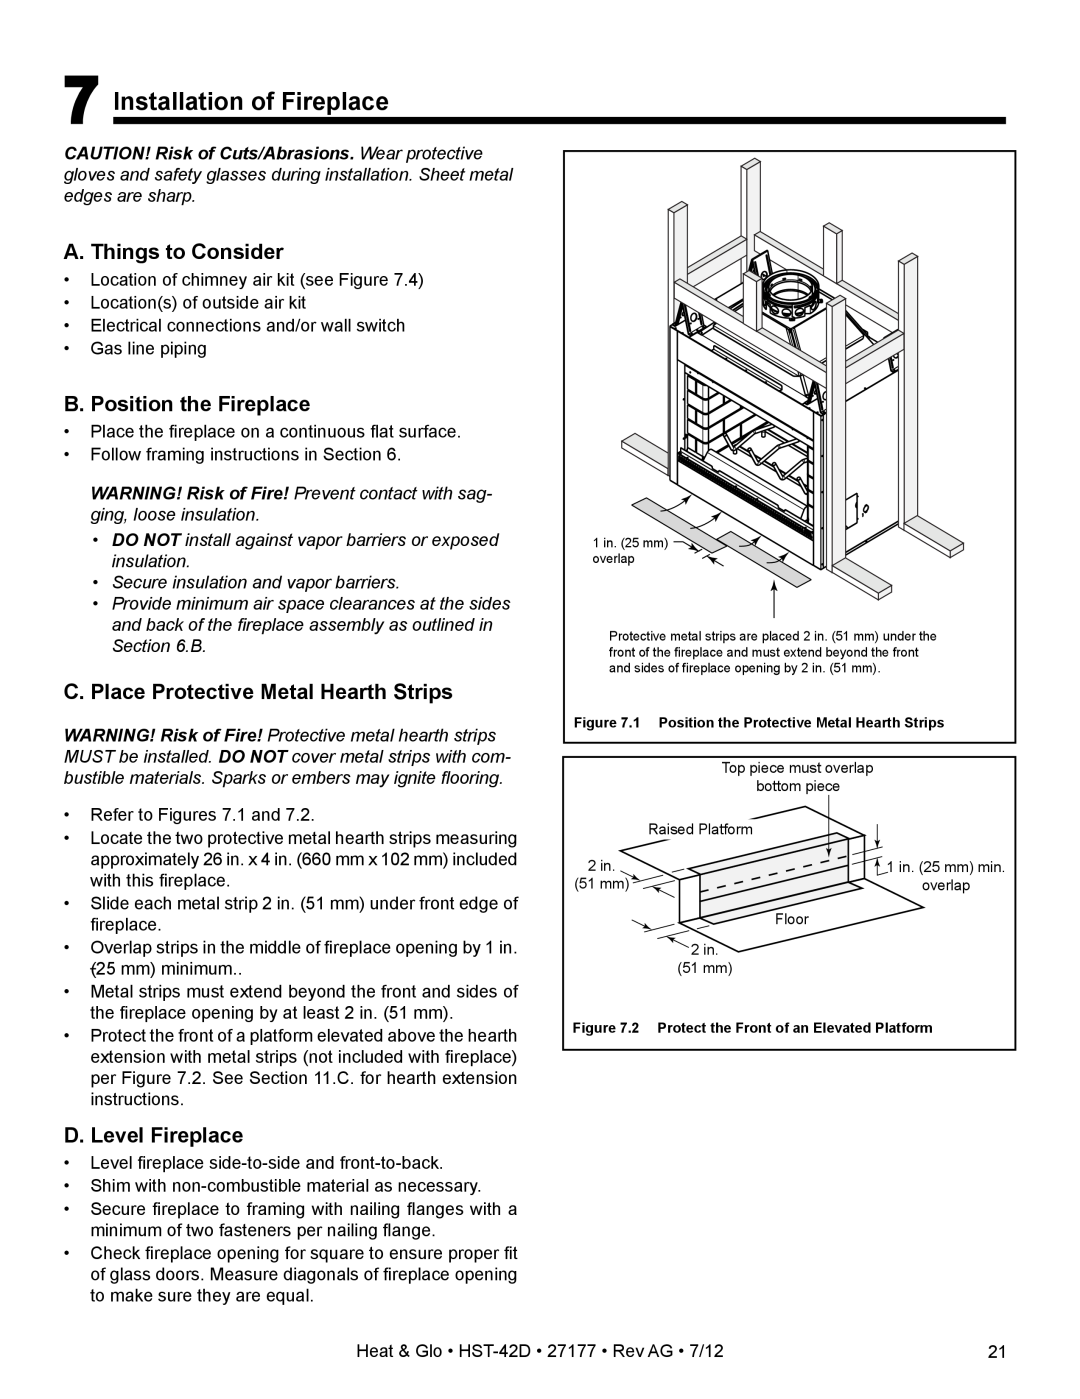 Heat & Glo LifeStyle HST-42D owner manual 7Installation of Fireplace, A. Things to Consider, B. Position the Fireplace 